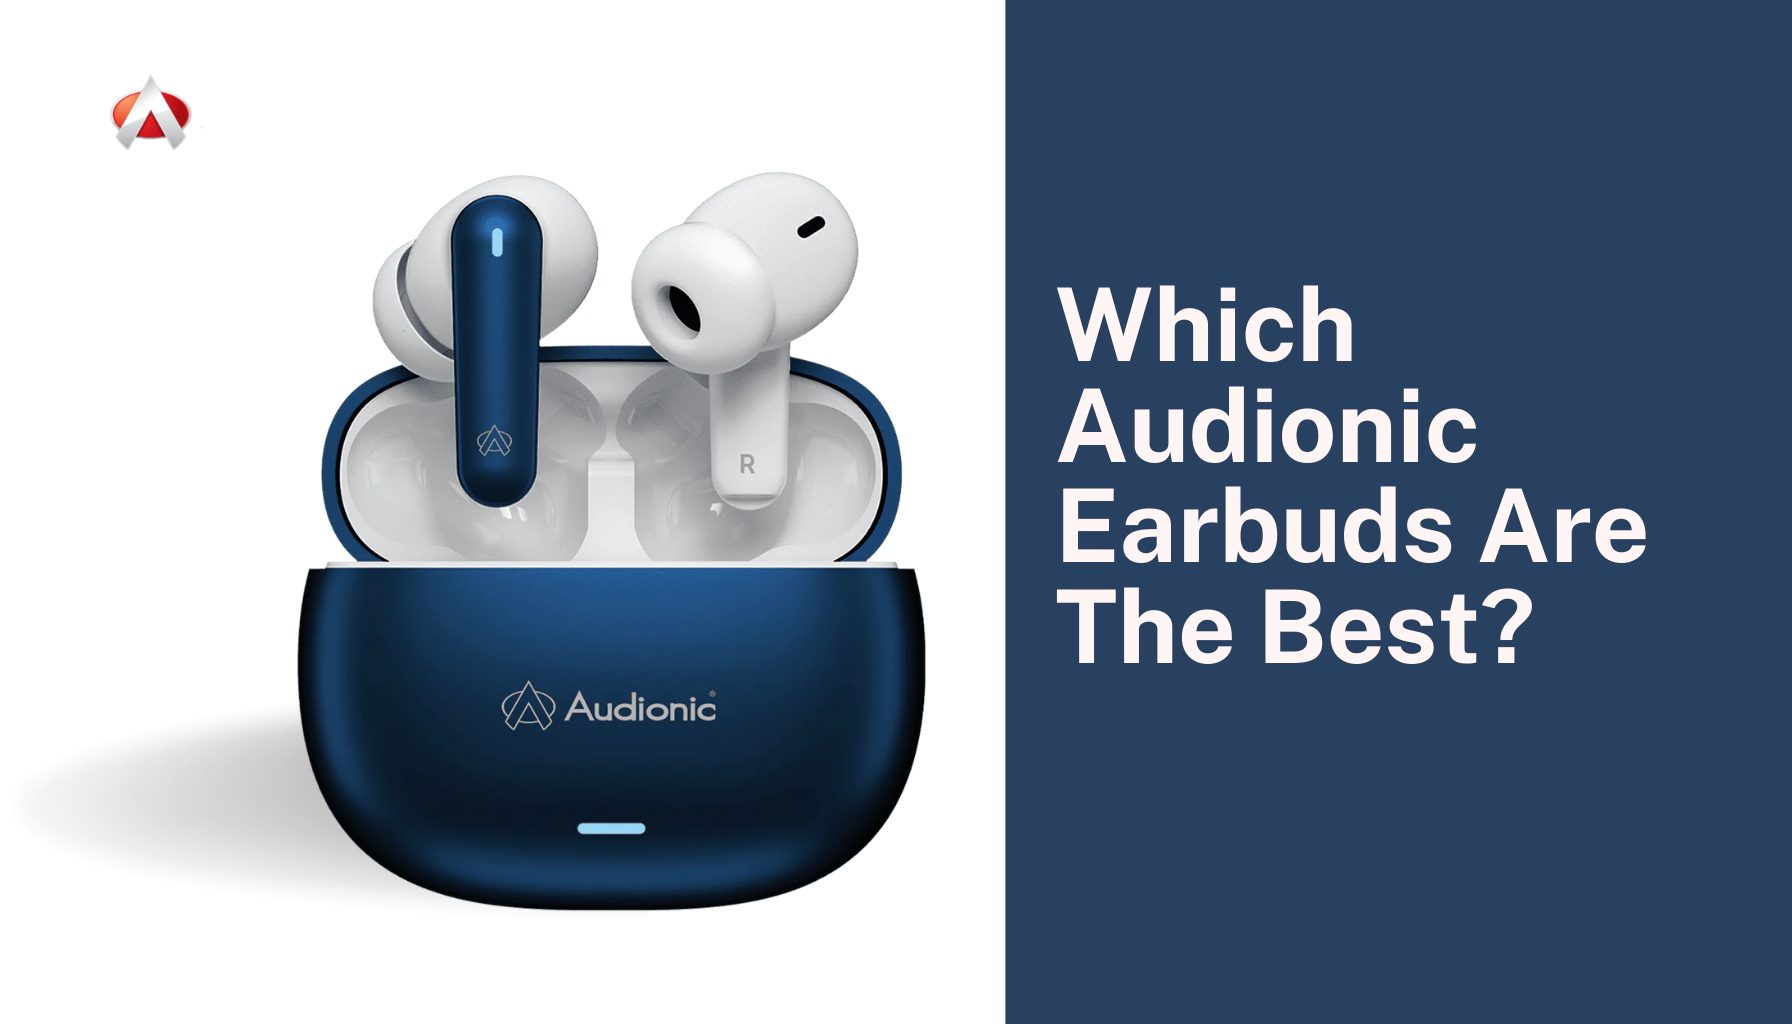 Which Audionic Earbuds Are The Best?